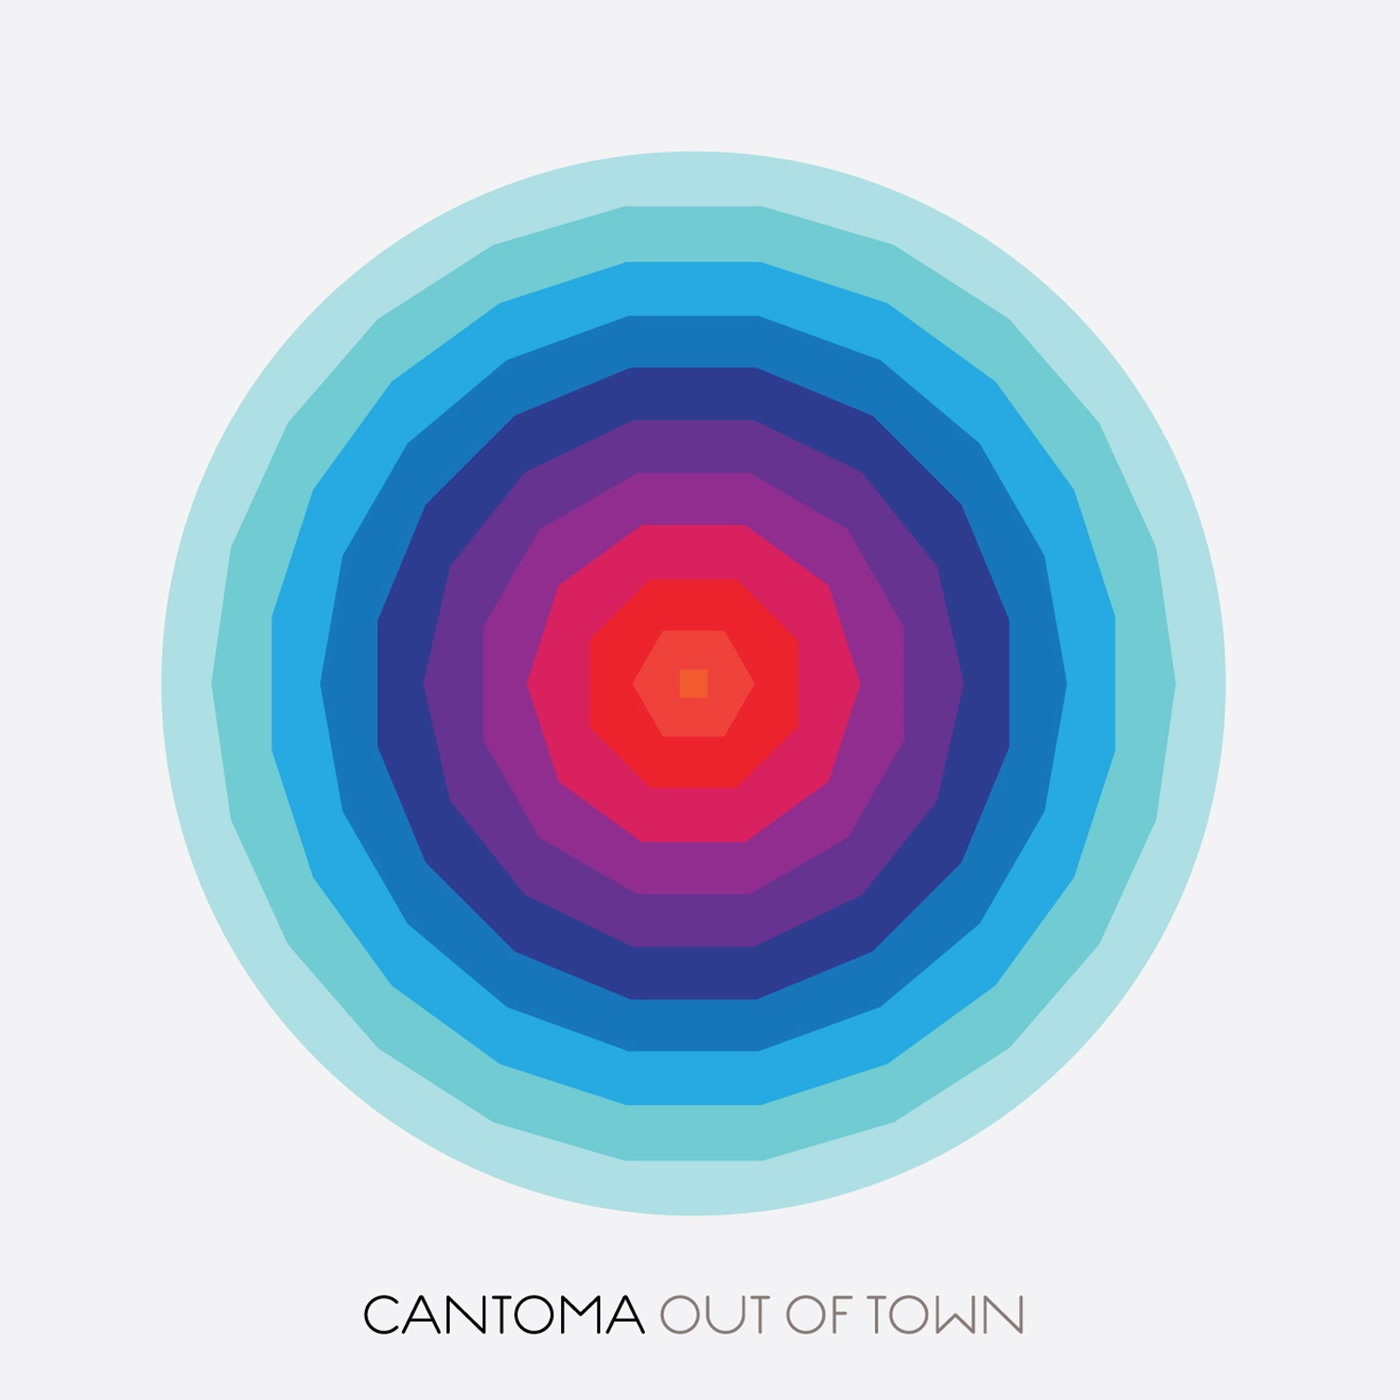 Cantoma - Out of Town / Highwood Recordings